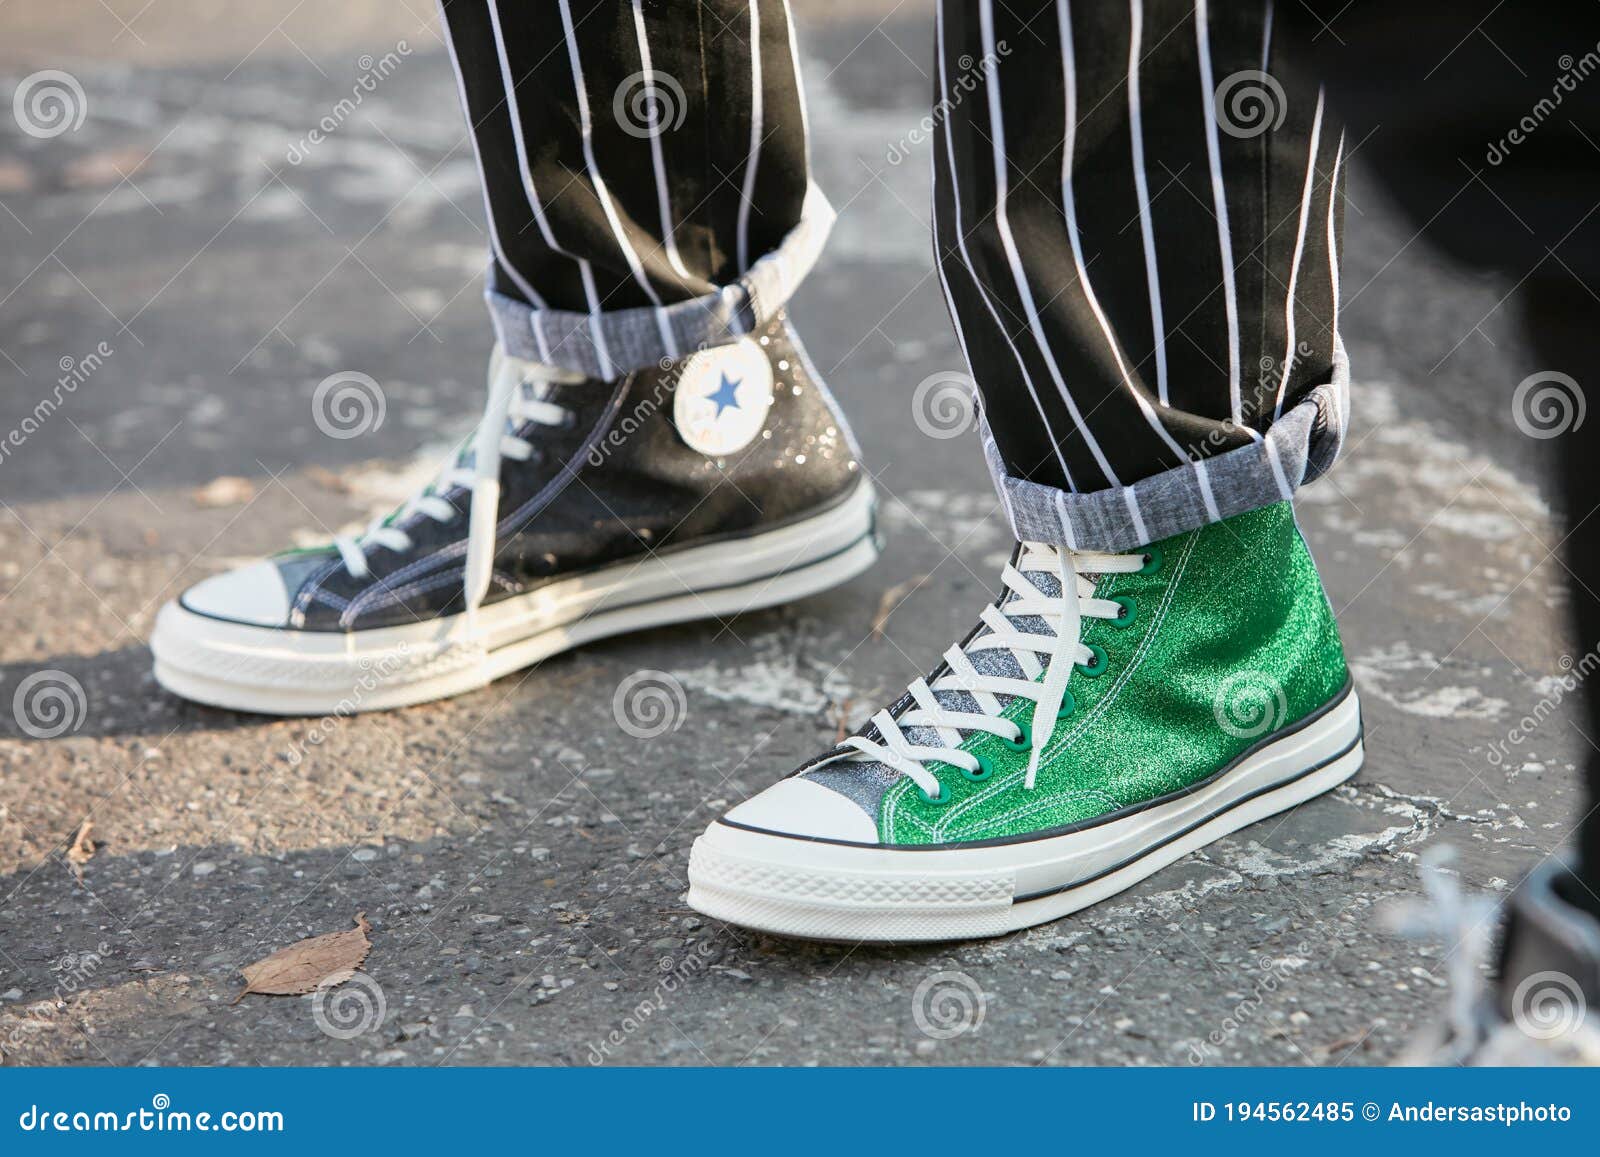 Man with Green Converse All Stars Glitter Sneakers and Black and ...